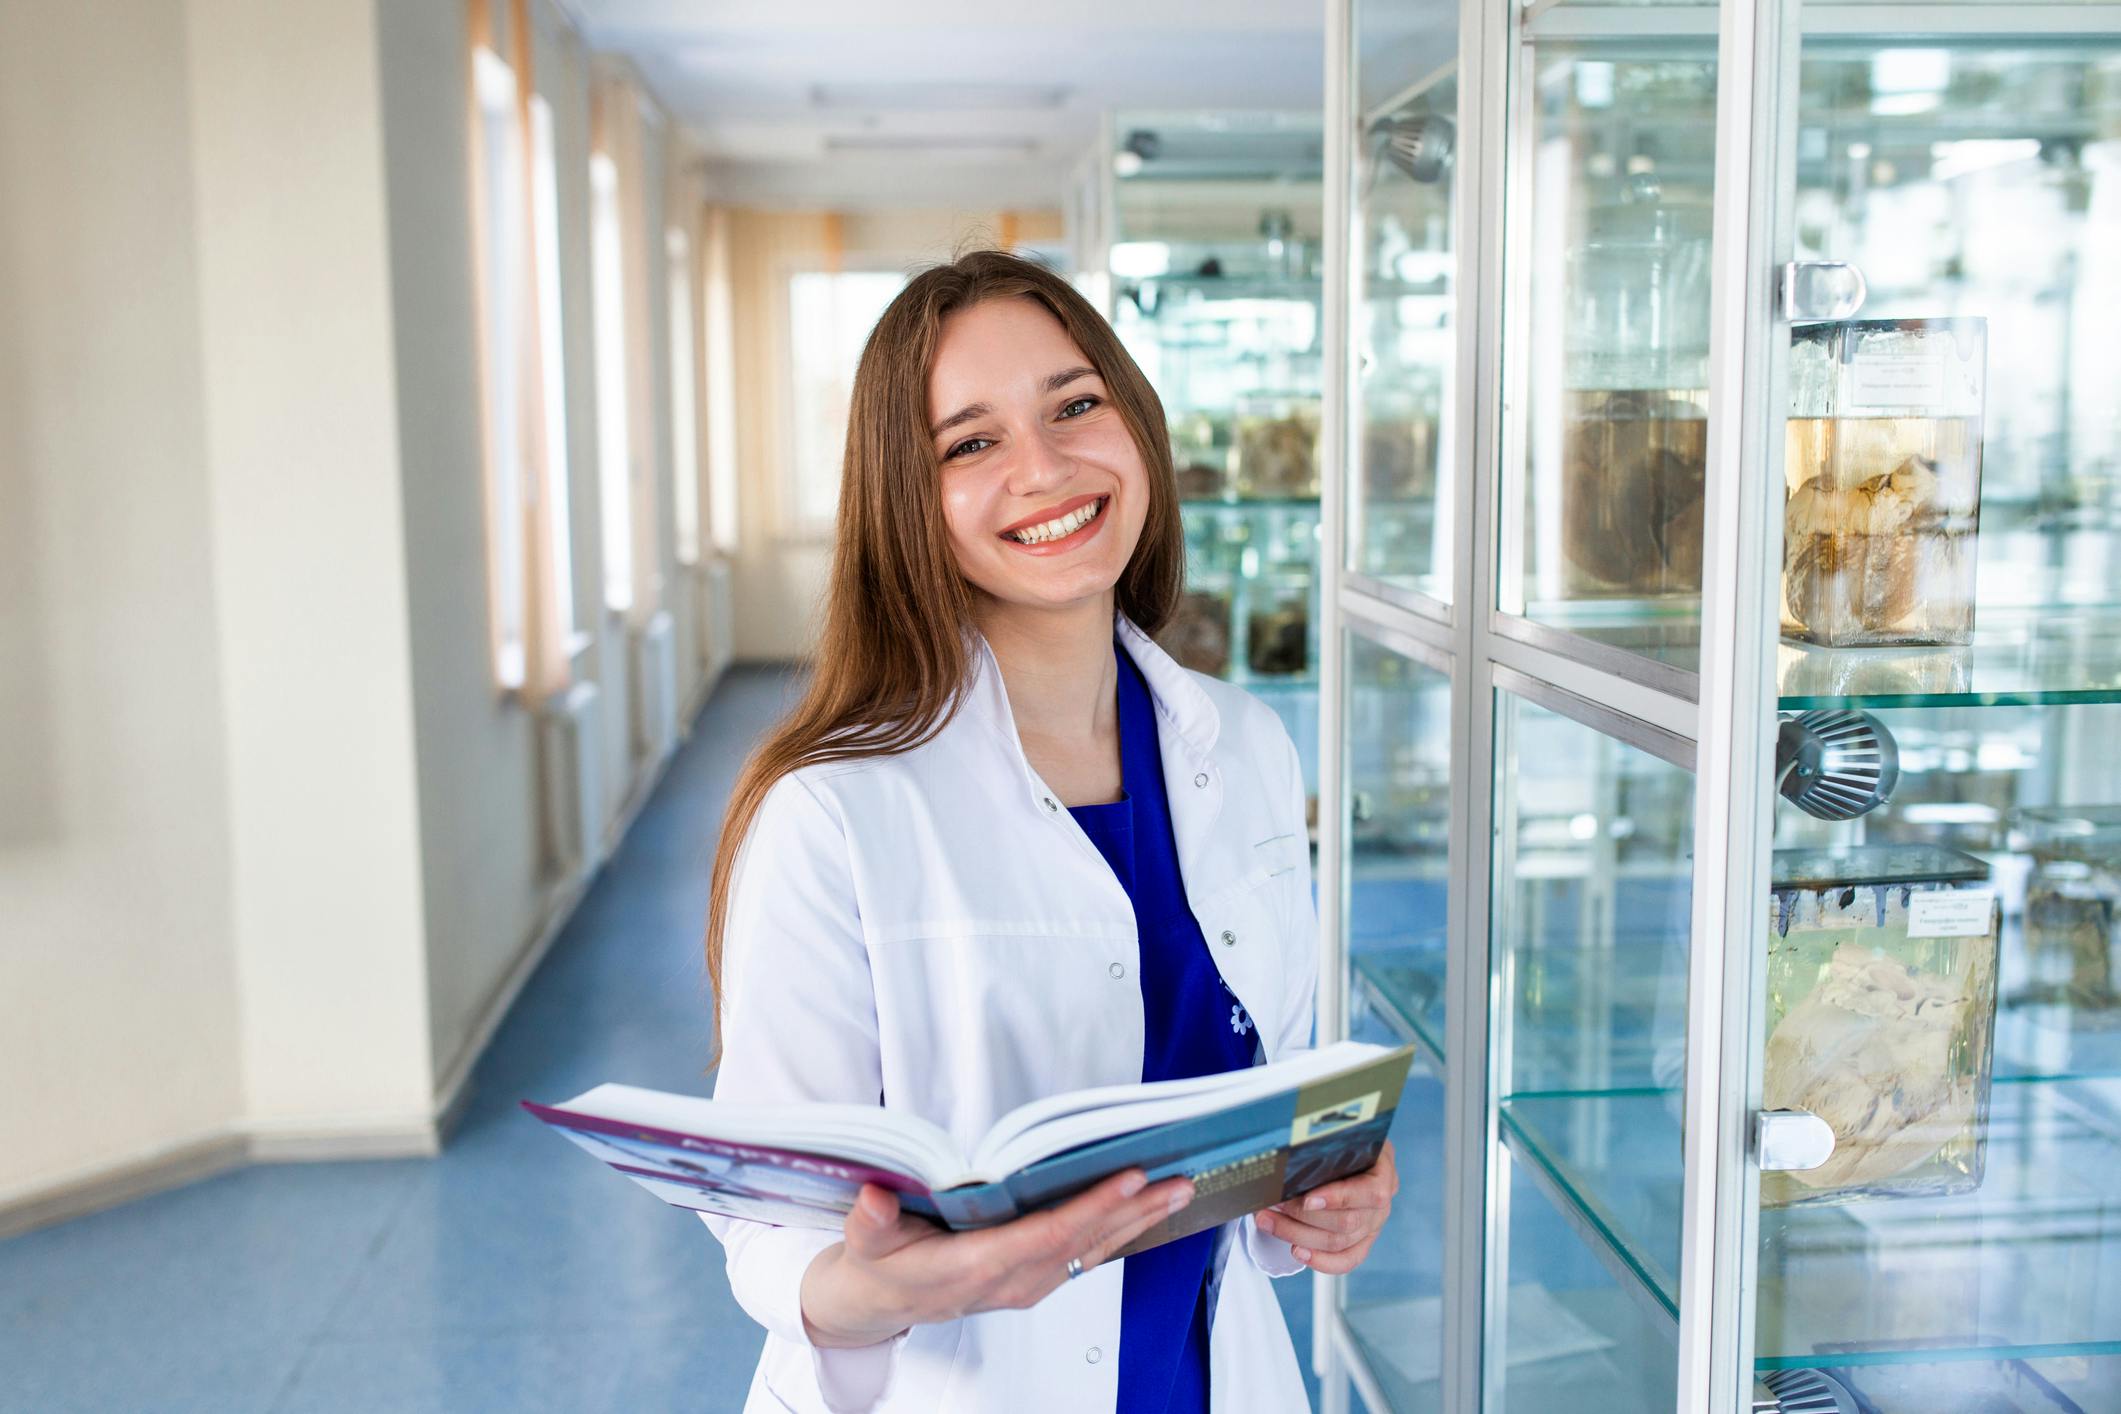 Female medical student standing in front of an cabinet with anatomical items